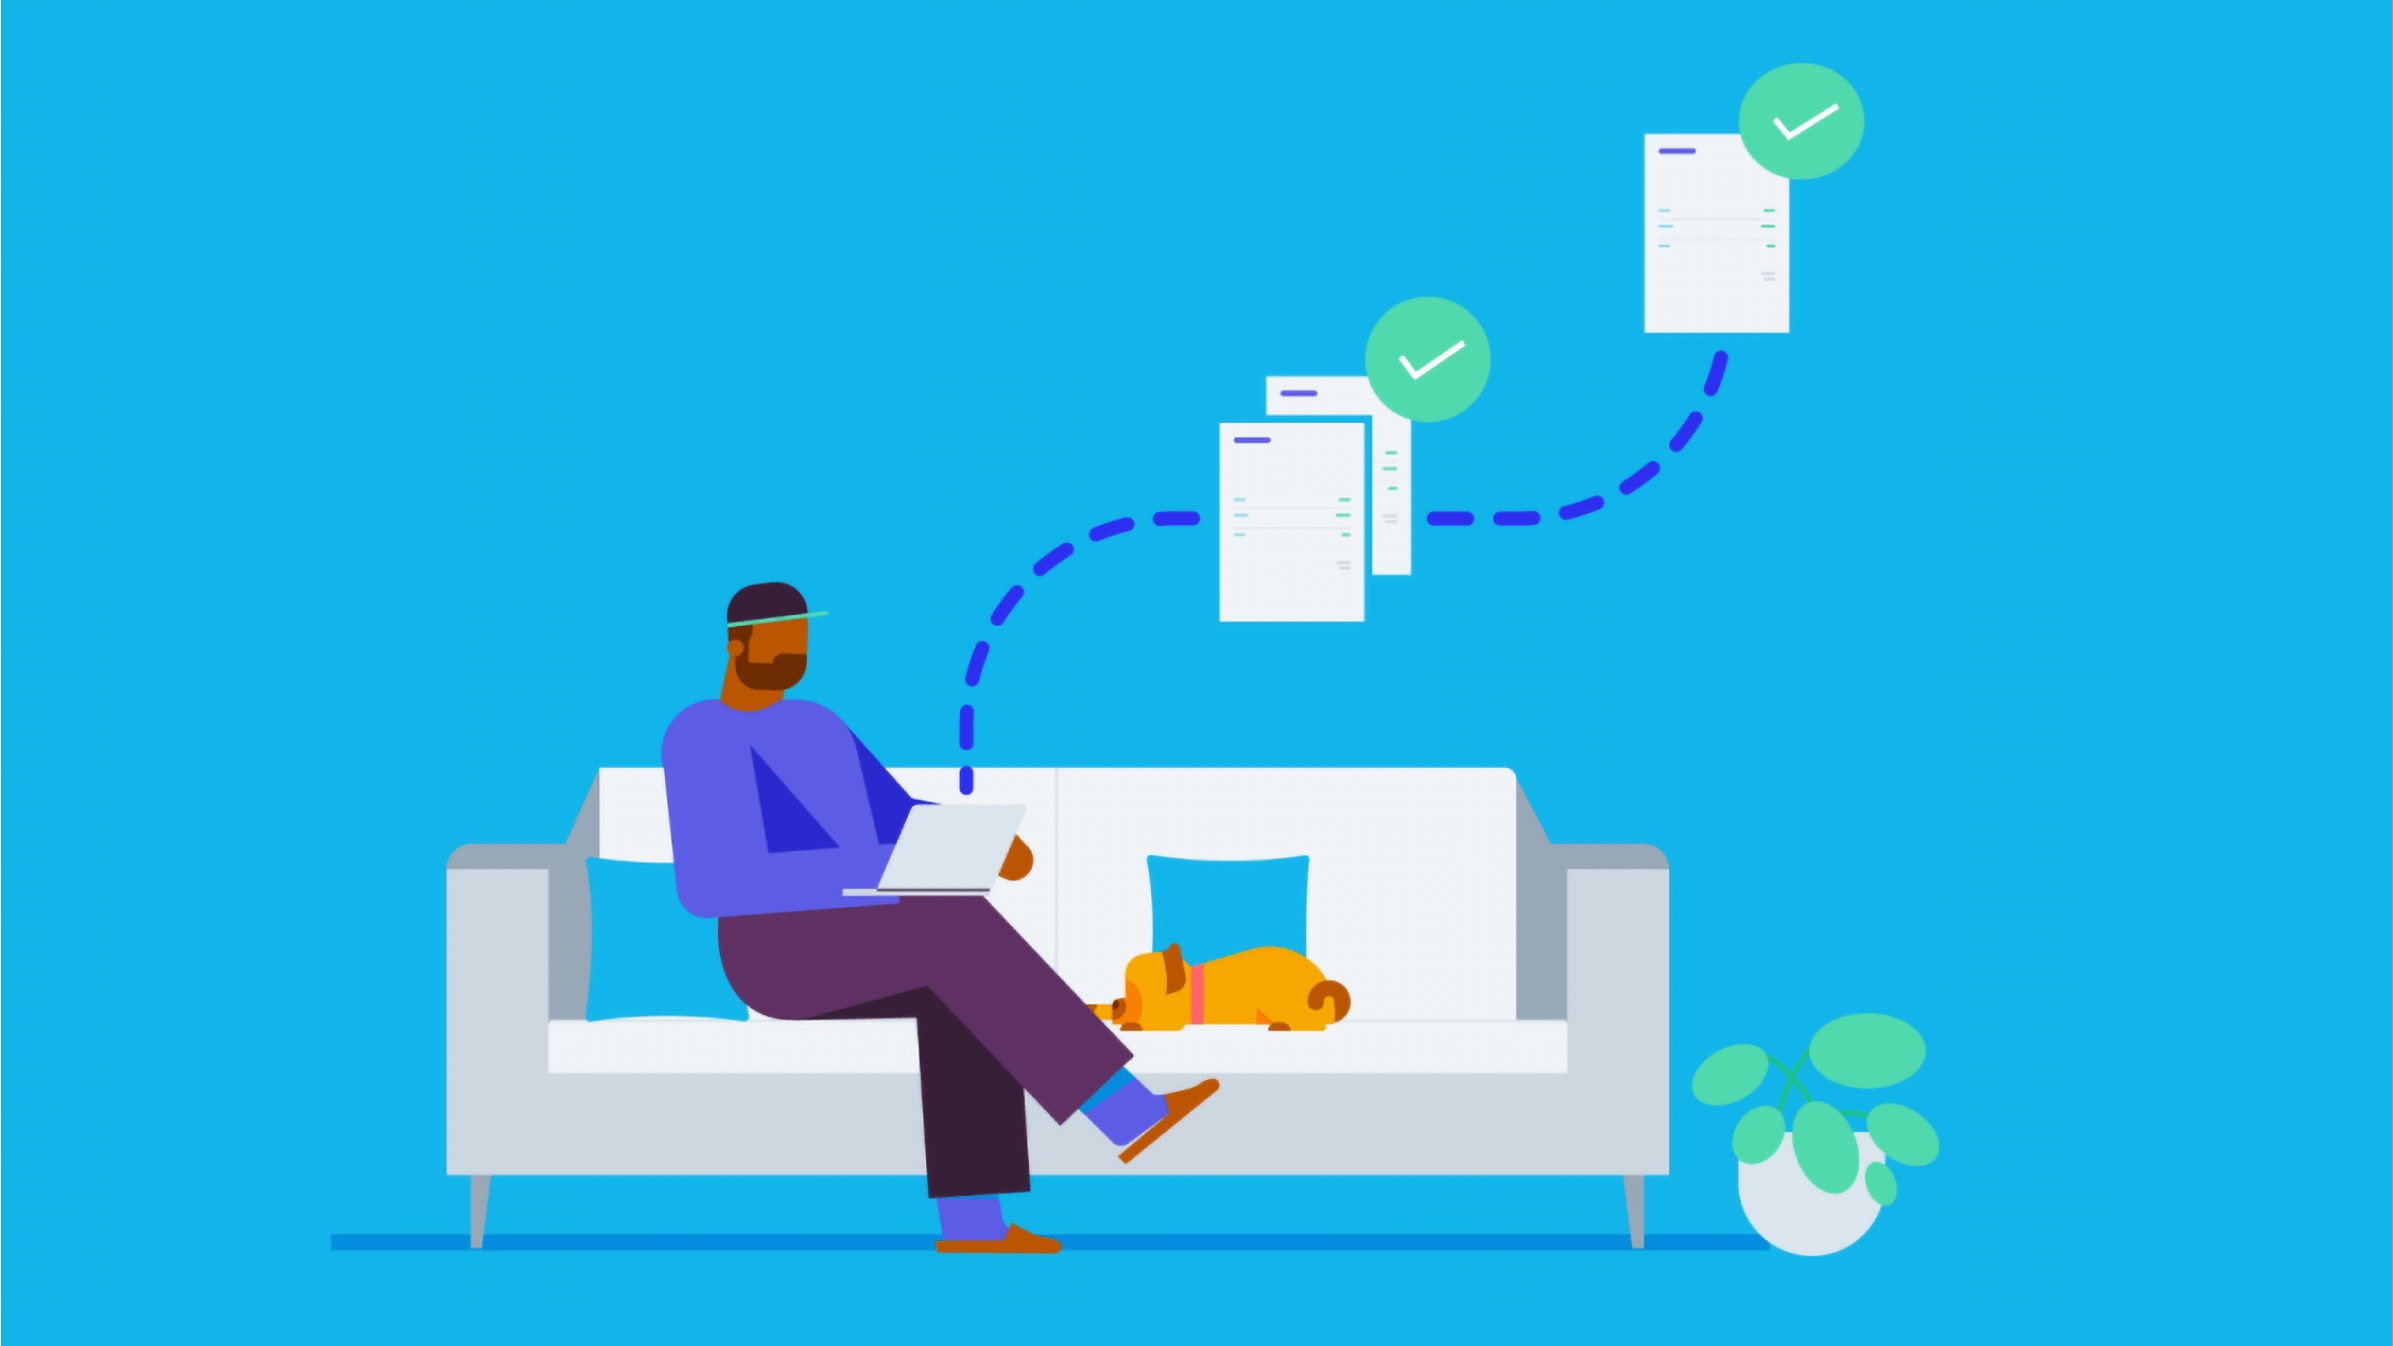 A business owner relaxes on a sofa with their dog, using Xero accounting software to check their business accounts.